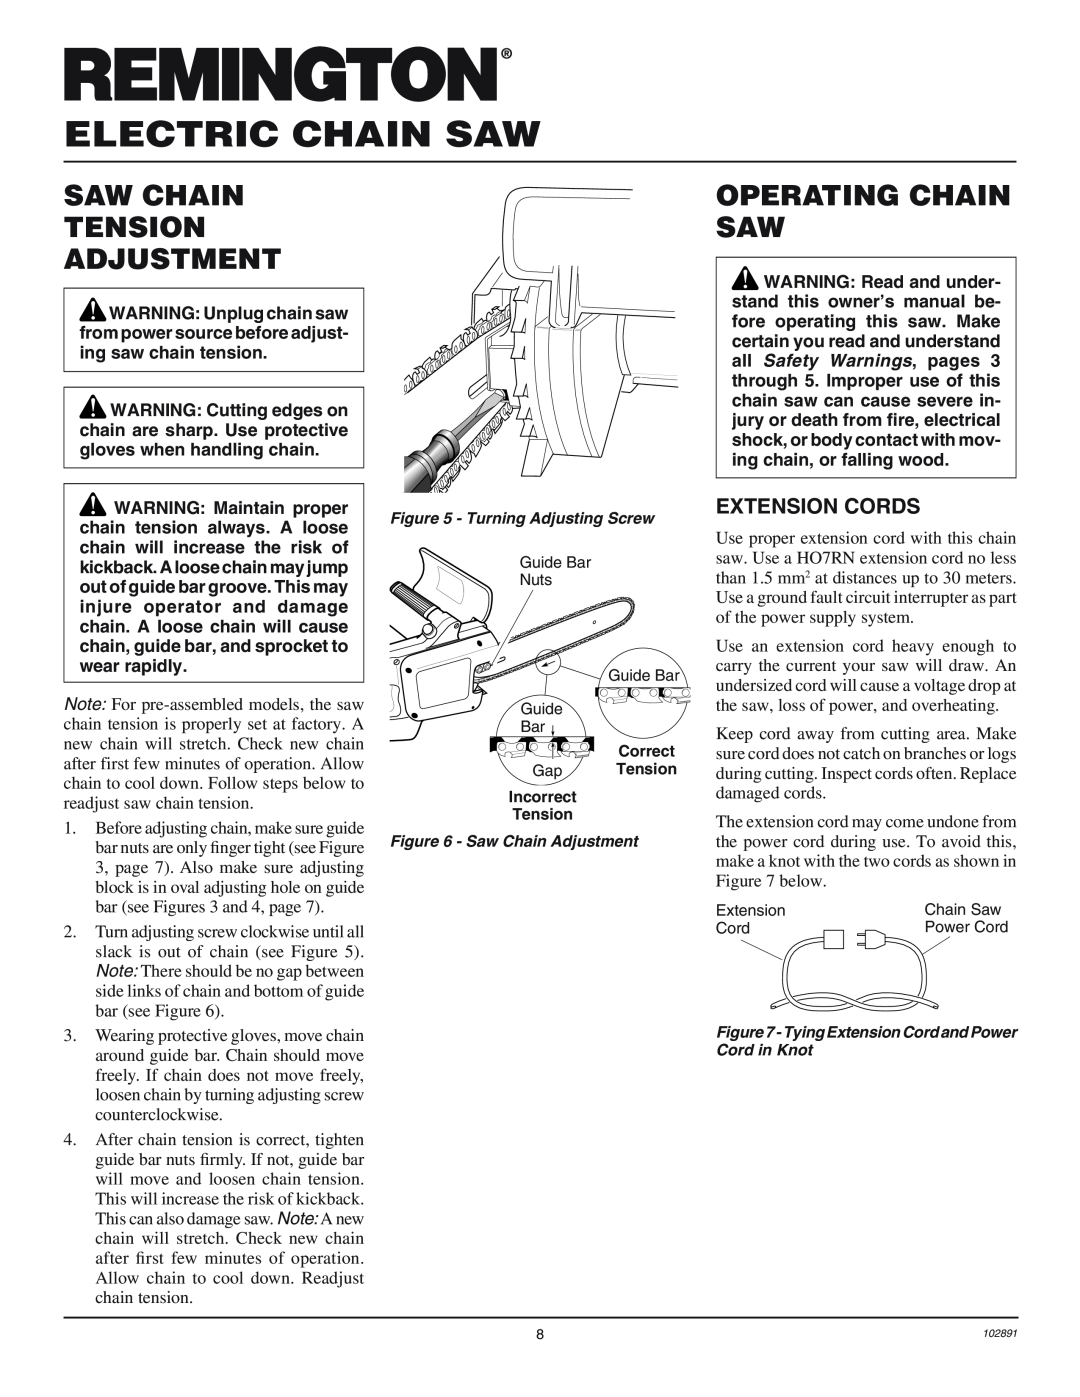 Desa 100271-01 owner manual Saw Chain Tension Adjustment, Operating Chain Saw, Extension Cords, Electric Chain Saw 